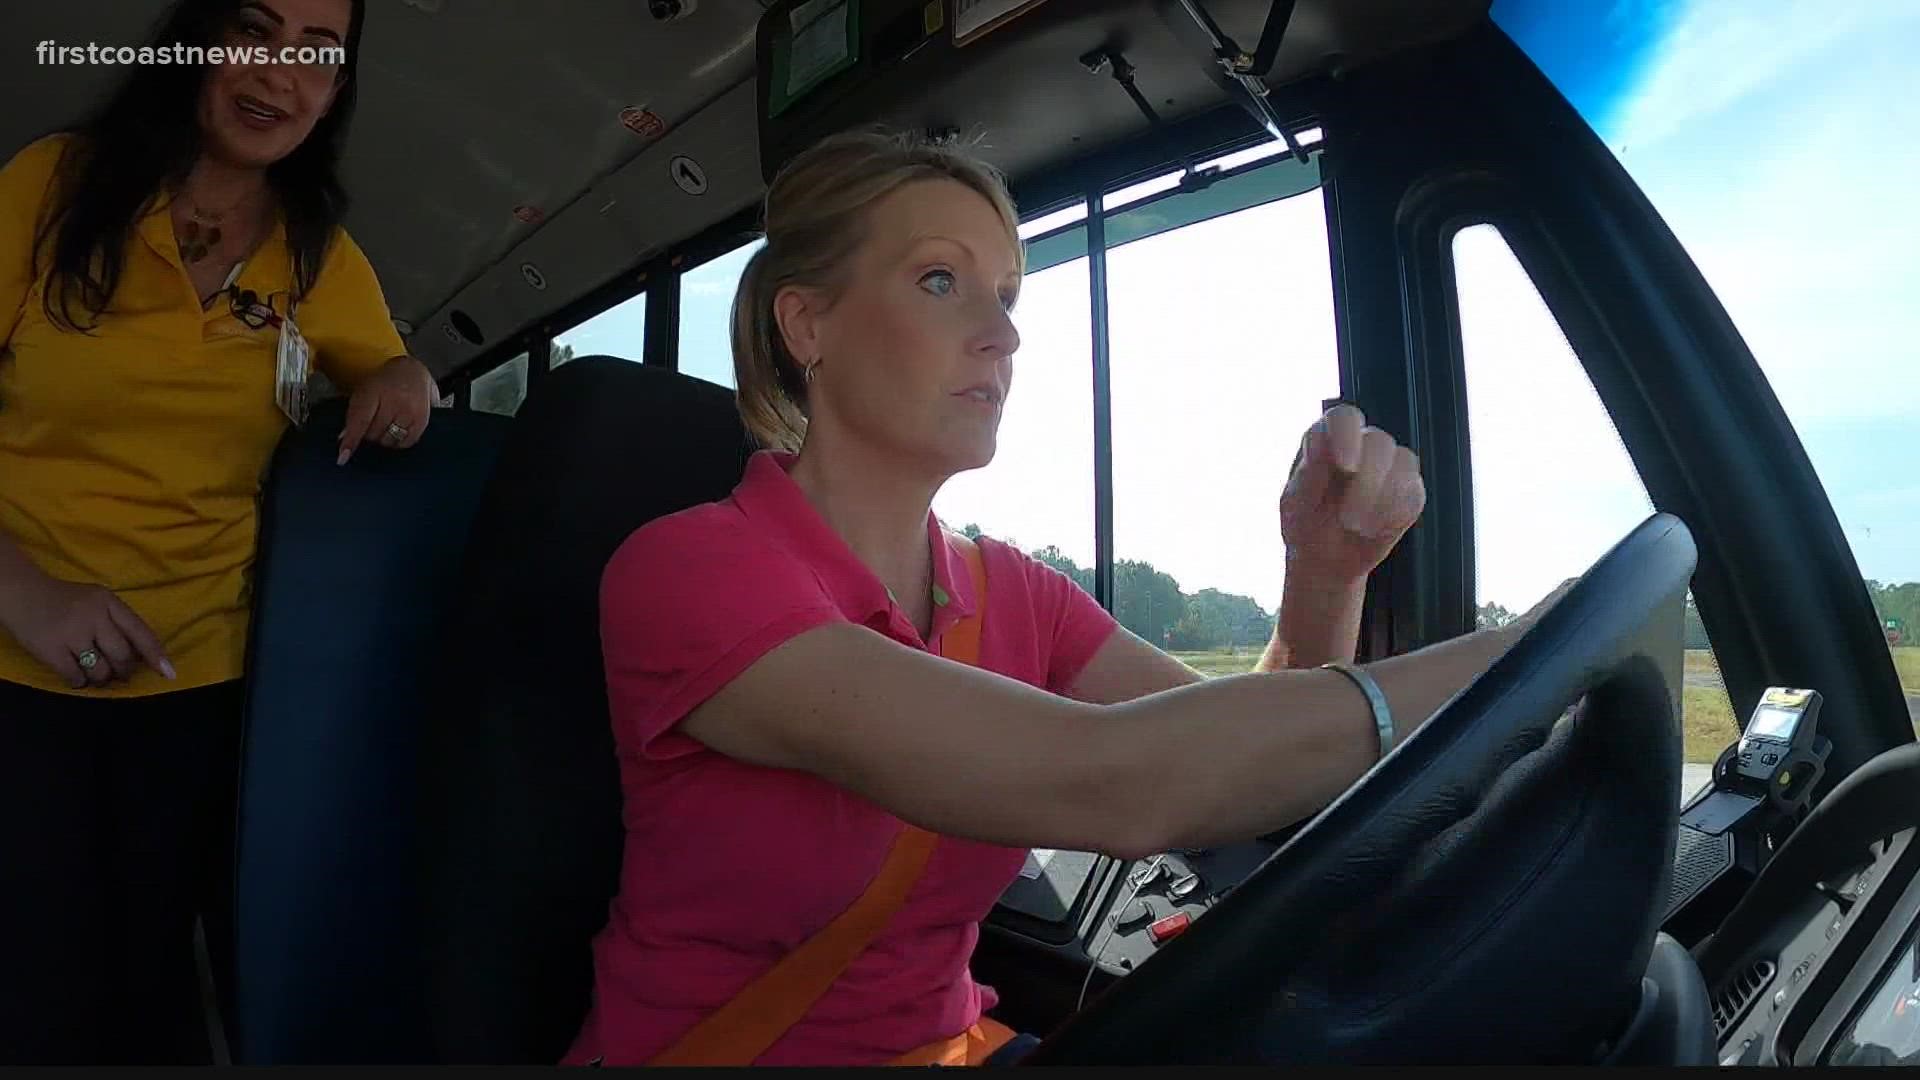 On Friday, the district asked First Coast News' Jessica Clark to climb into the drivers' seat to demonstrate that anyone can learn to drive a bus!